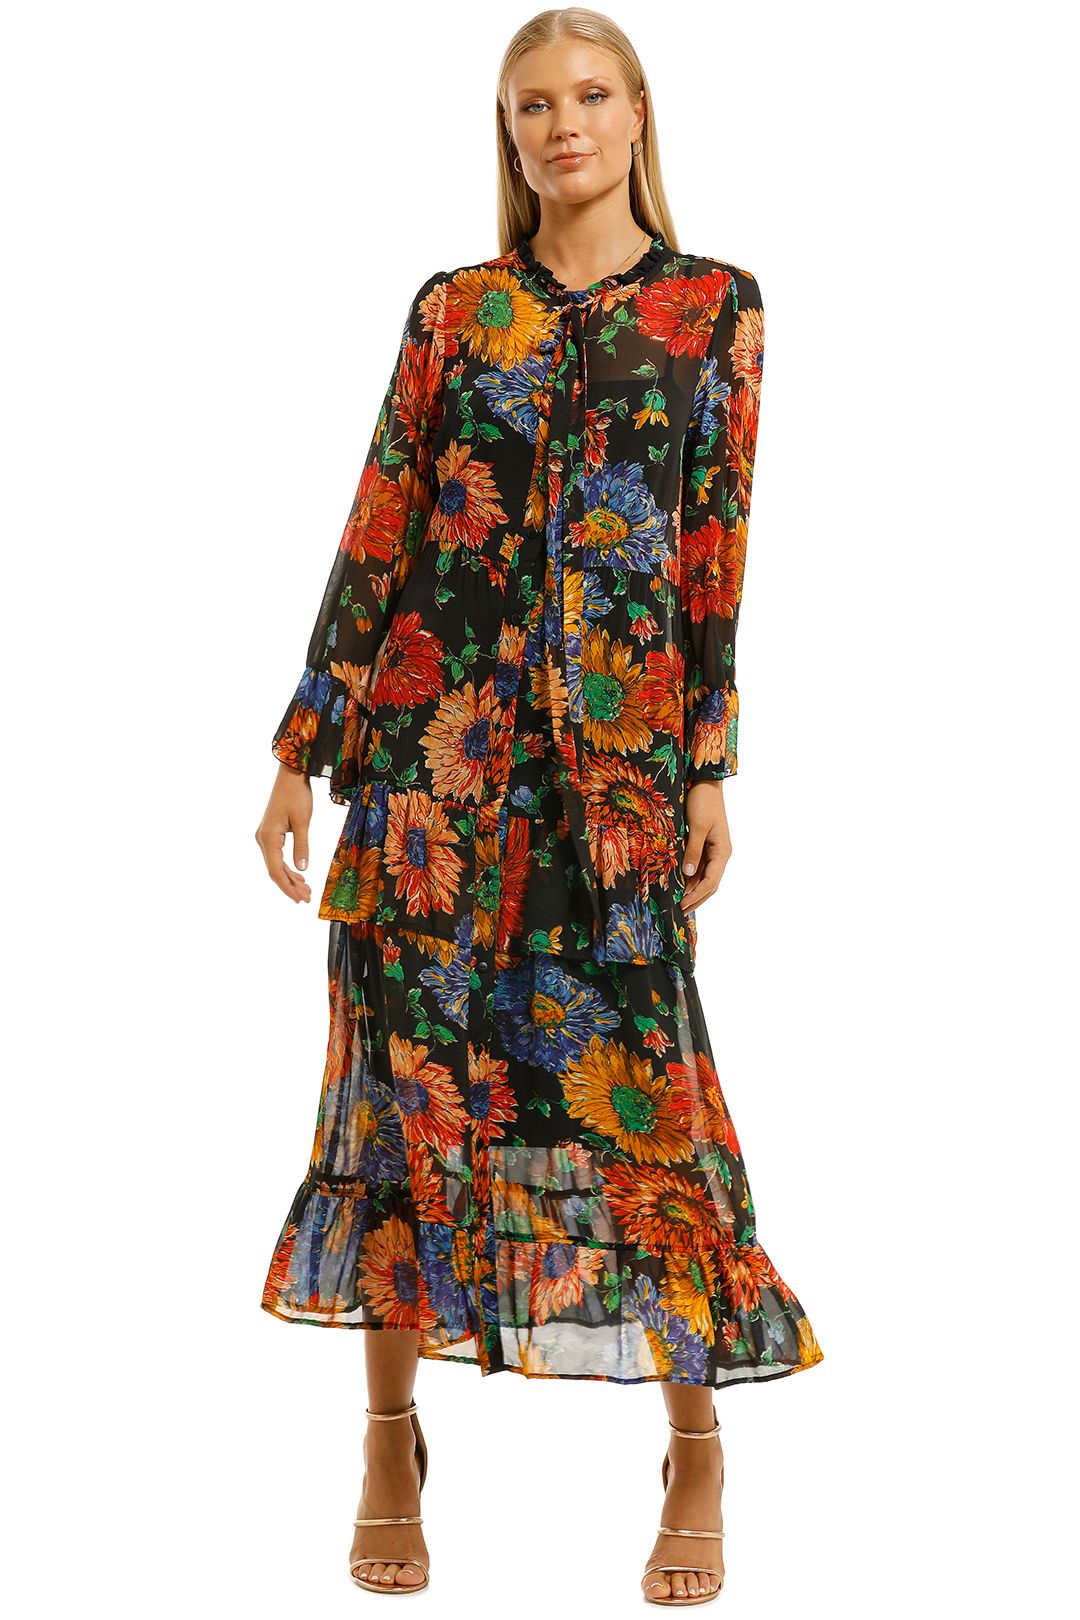 Curate-by-Trelise-Cooper-Long-With-The-Wind-Dress-Flower-Front